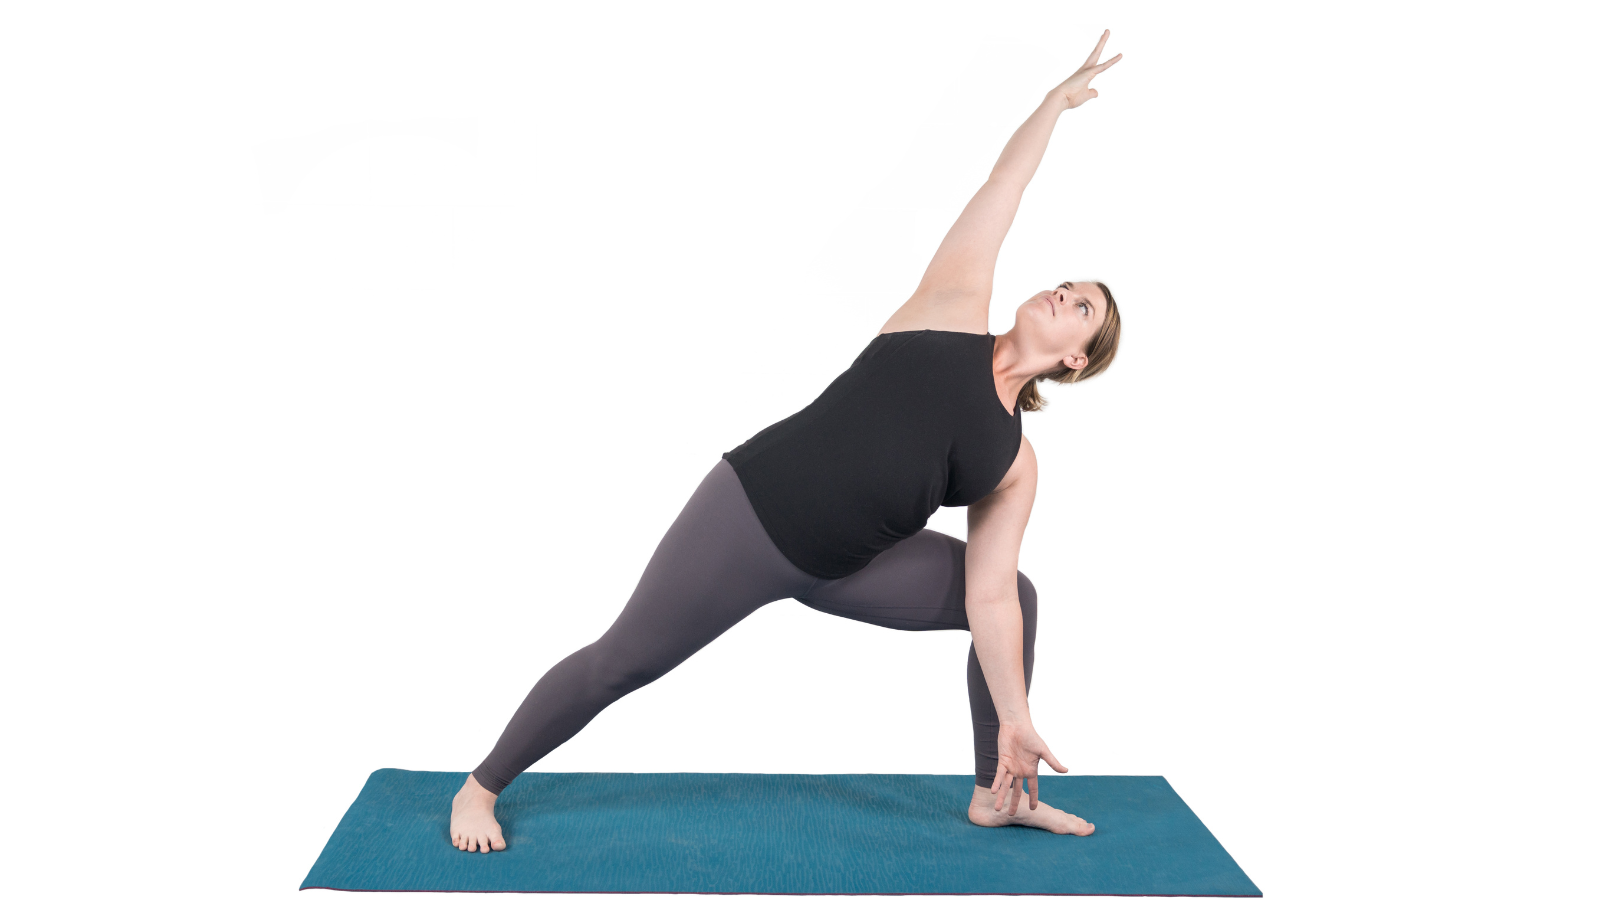 In poses like Parsvakonasana, the yoga student must take extra care with the cervical vertebrae to move slowly and cautiously and in a comfortable ROM.